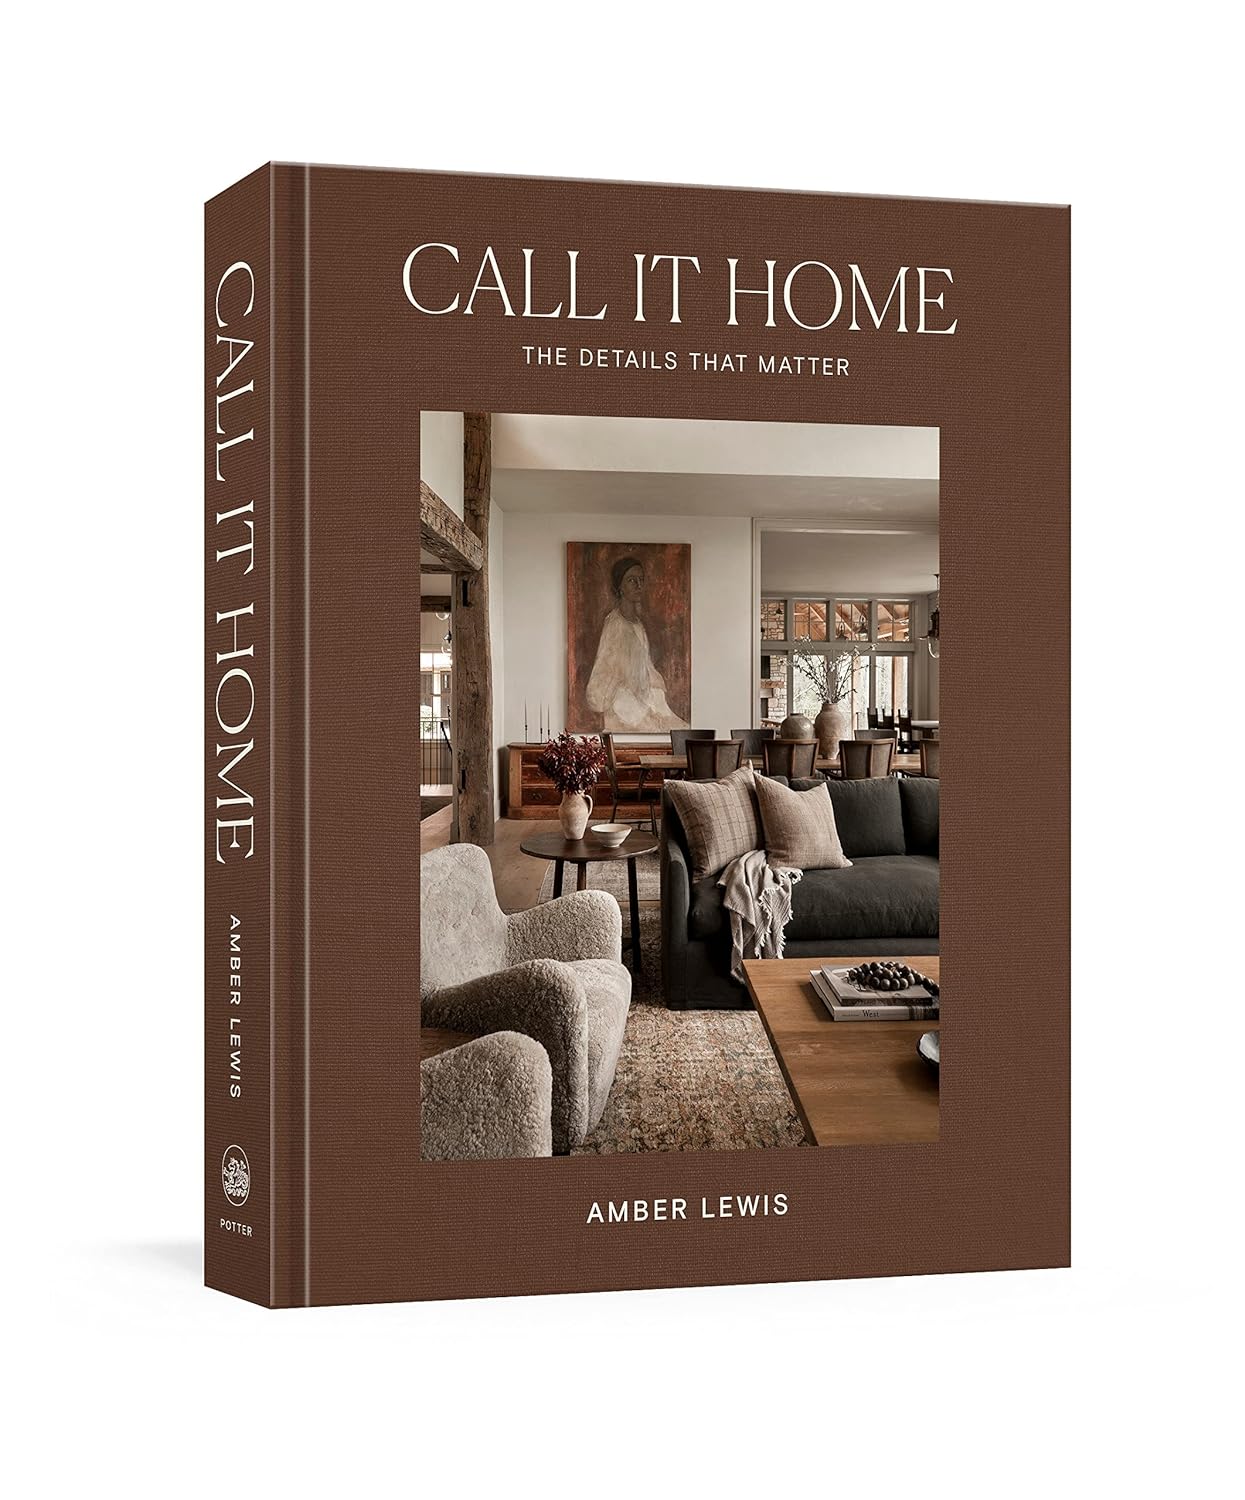 The latest addition of Amber Lewis collection. Call It Home, The Details that Matter